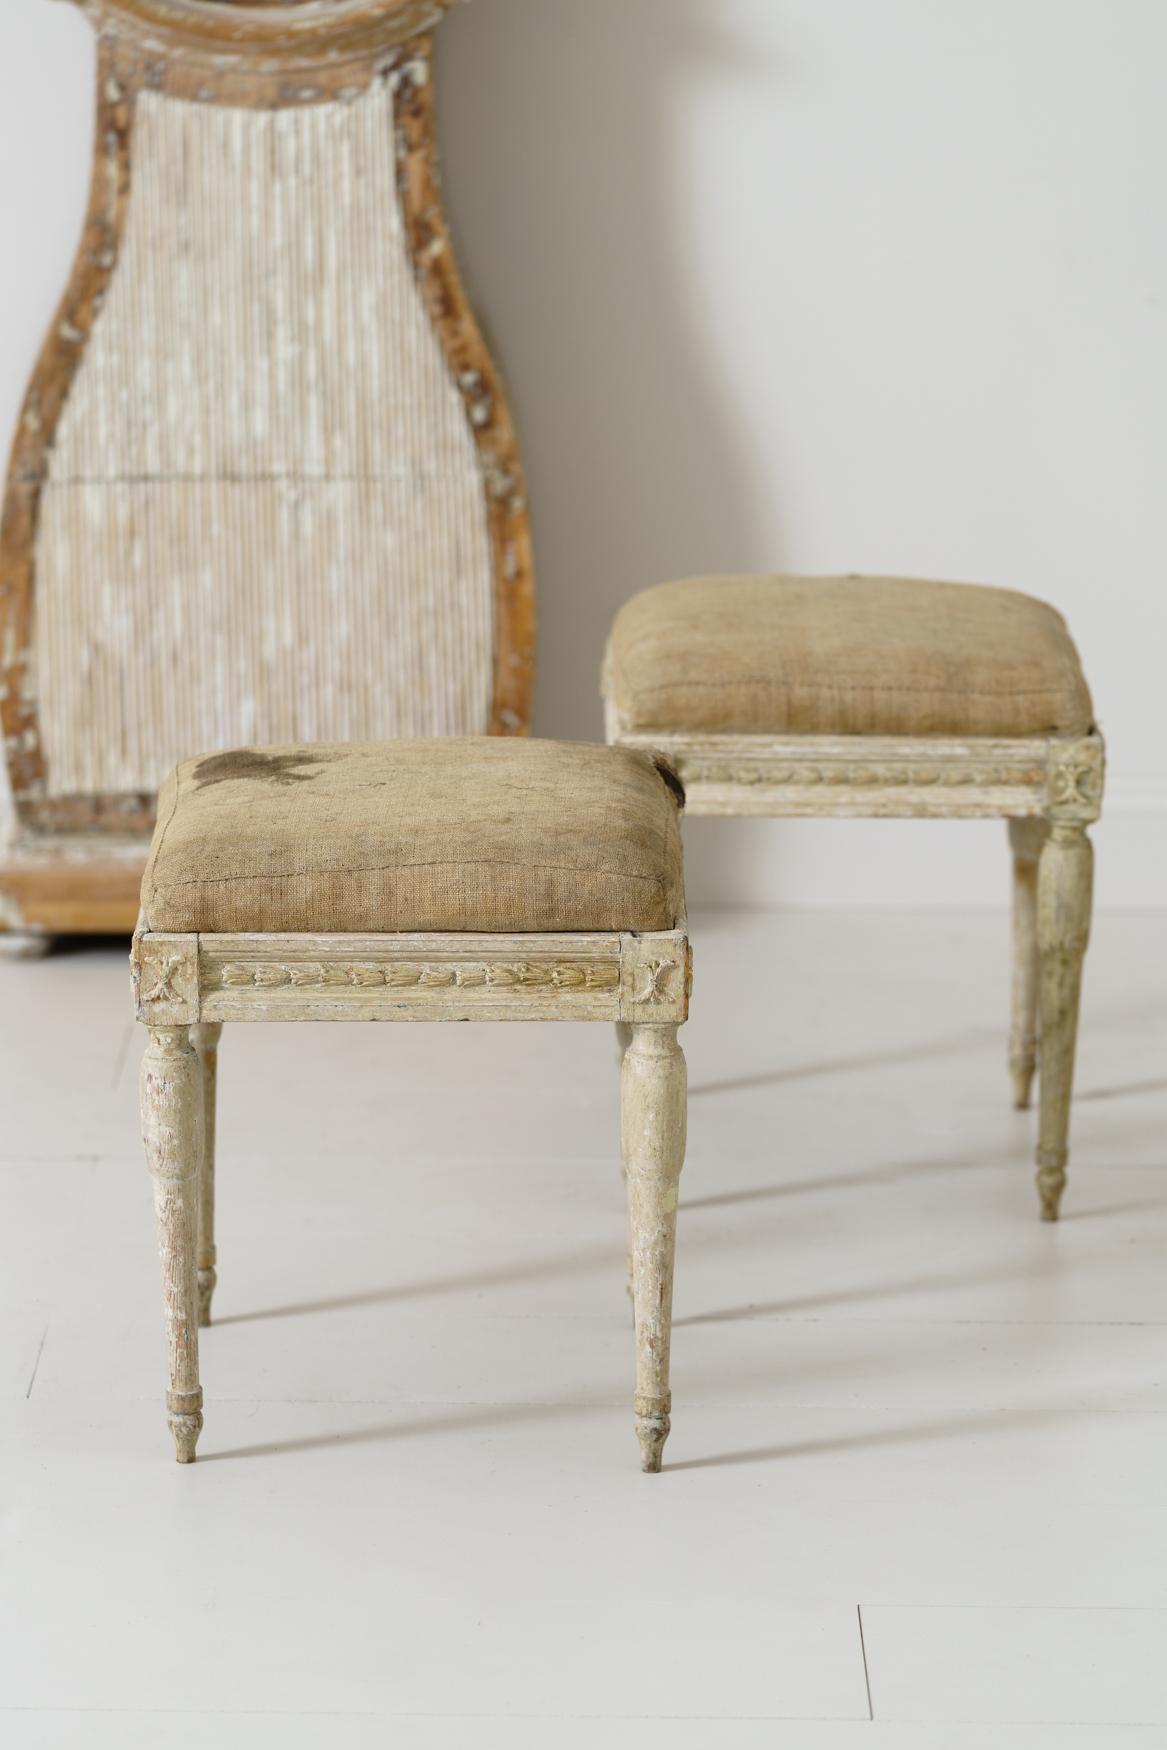 A pair of Swedish period Gustavian stools from the 19th century wearing their original linen. There are carved bell flowers on the seat frame with wheat sheaths on the corner posts. Manor house quality stools.